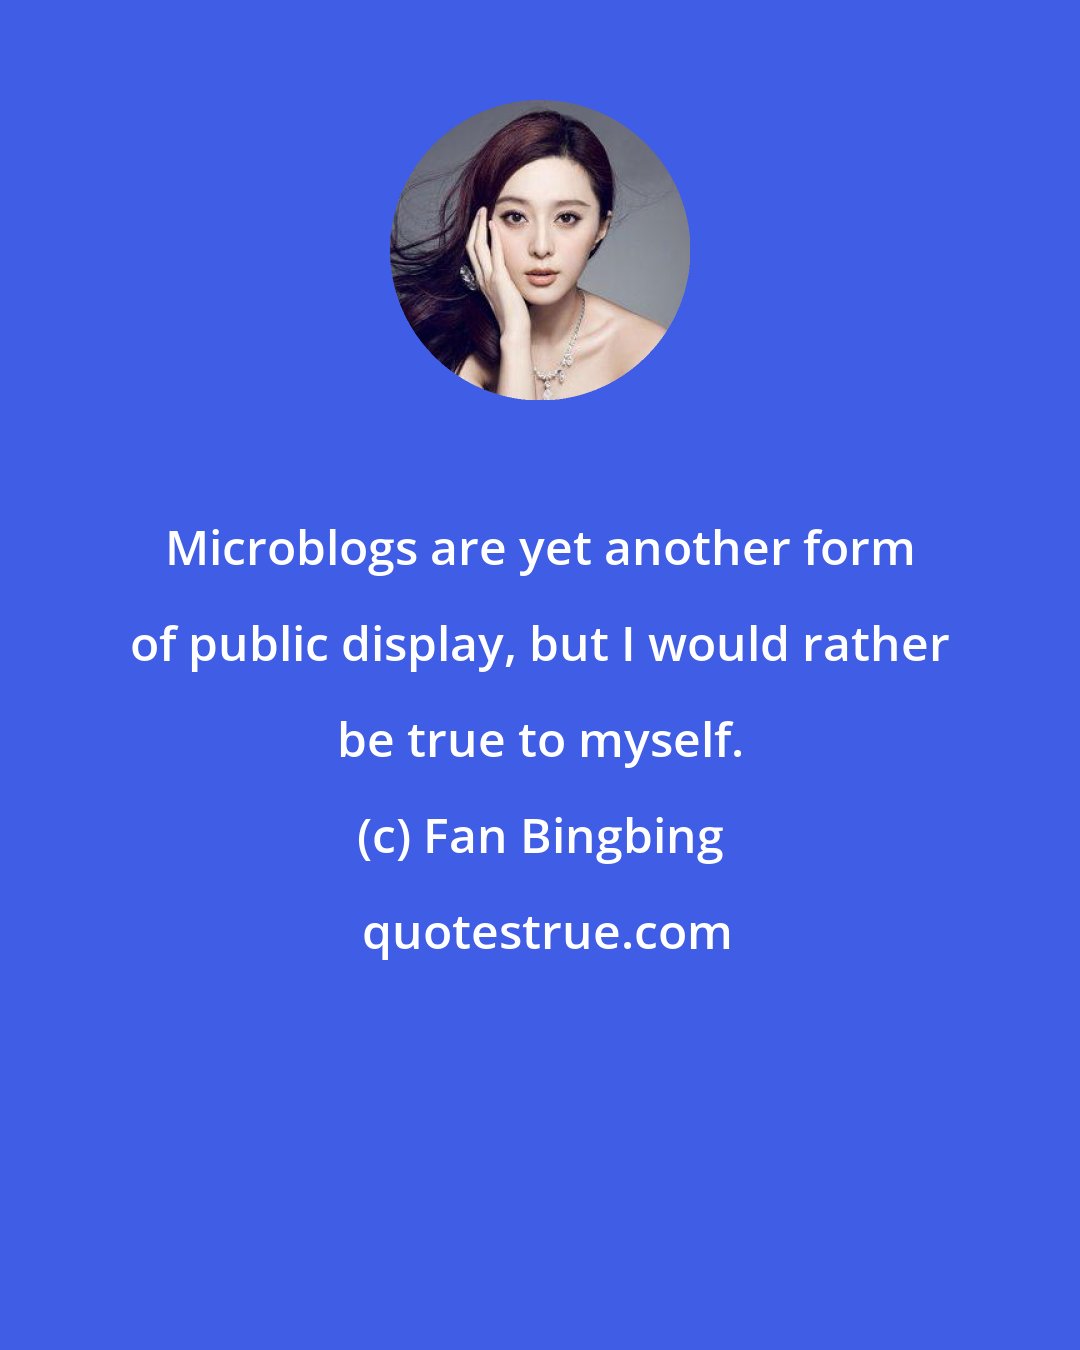 Fan Bingbing: Microblogs are yet another form of public display, but I would rather be true to myself.